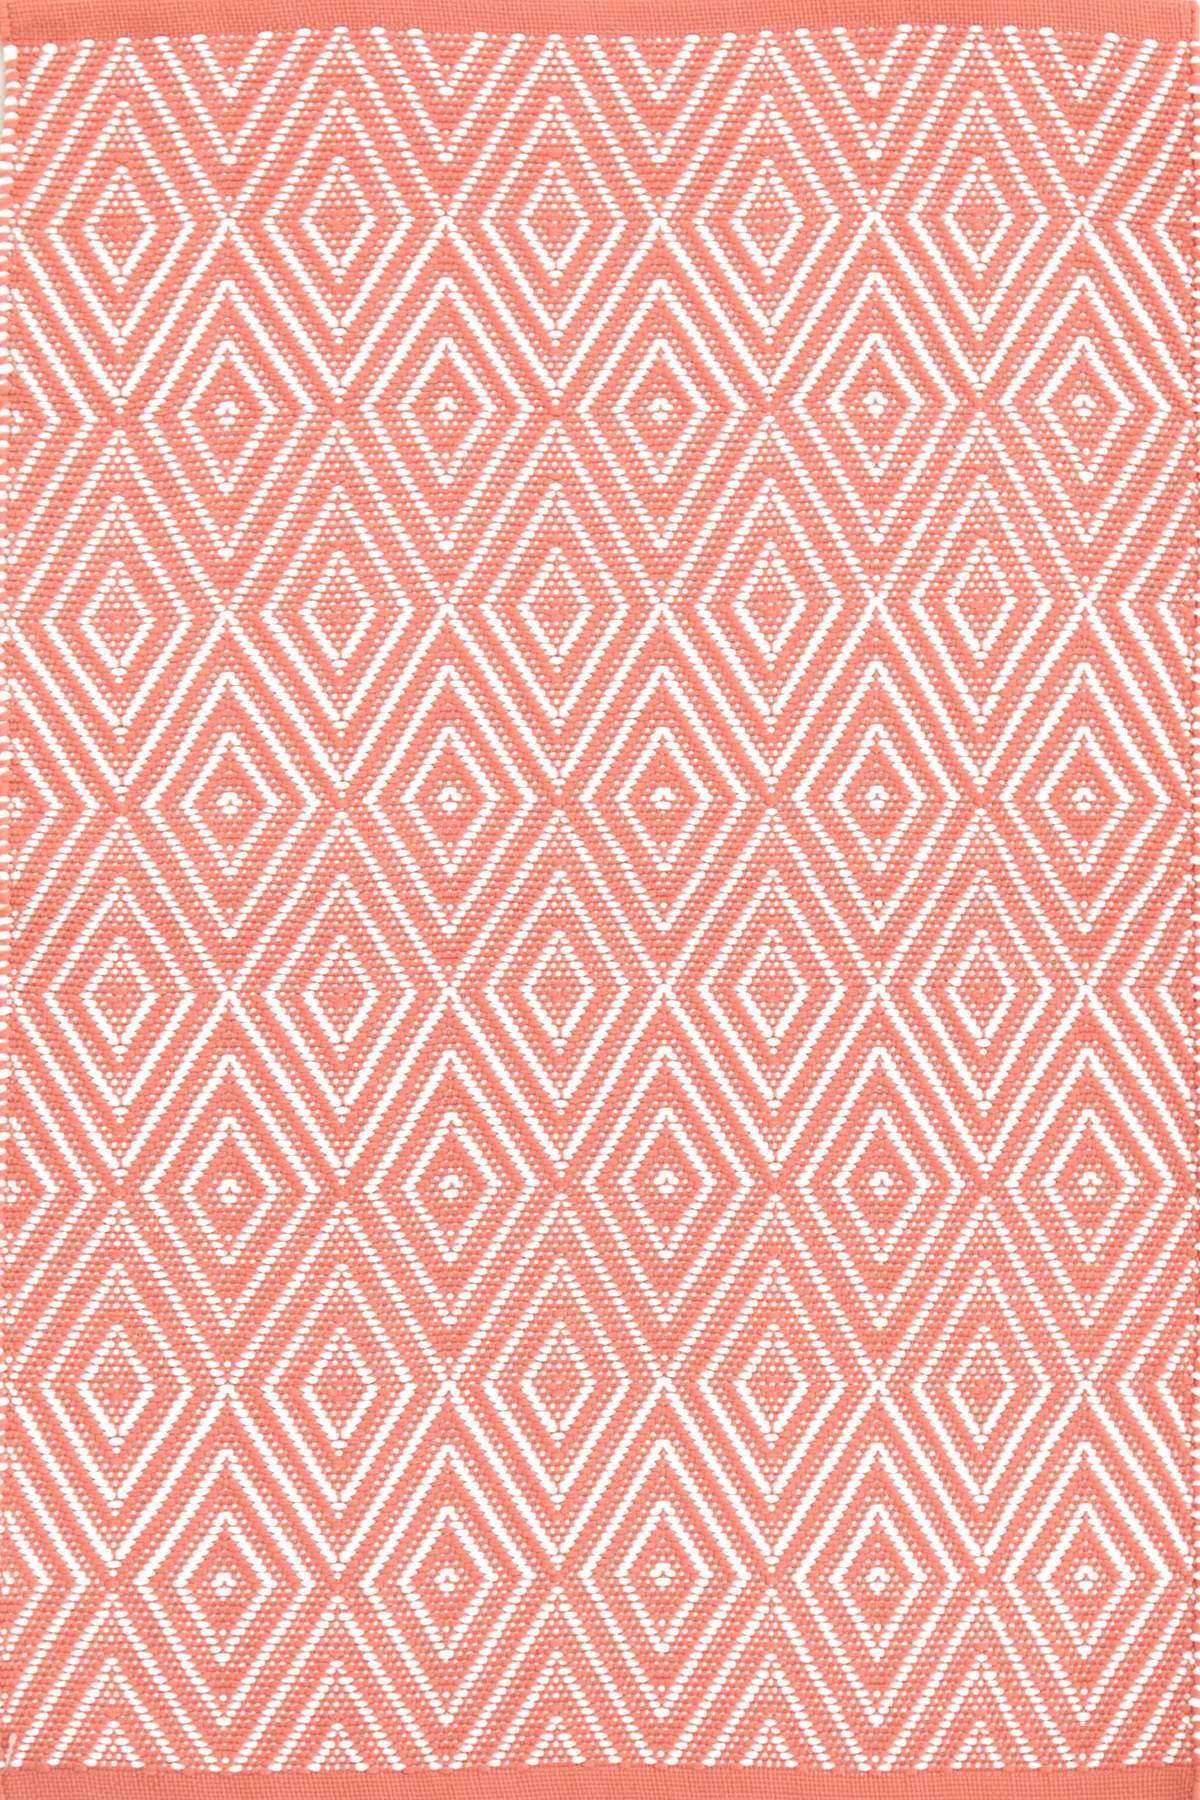 DIAMOND CORAL/WHITE INDOOR/OUTDOOR RUG-6"x9" - Image 0